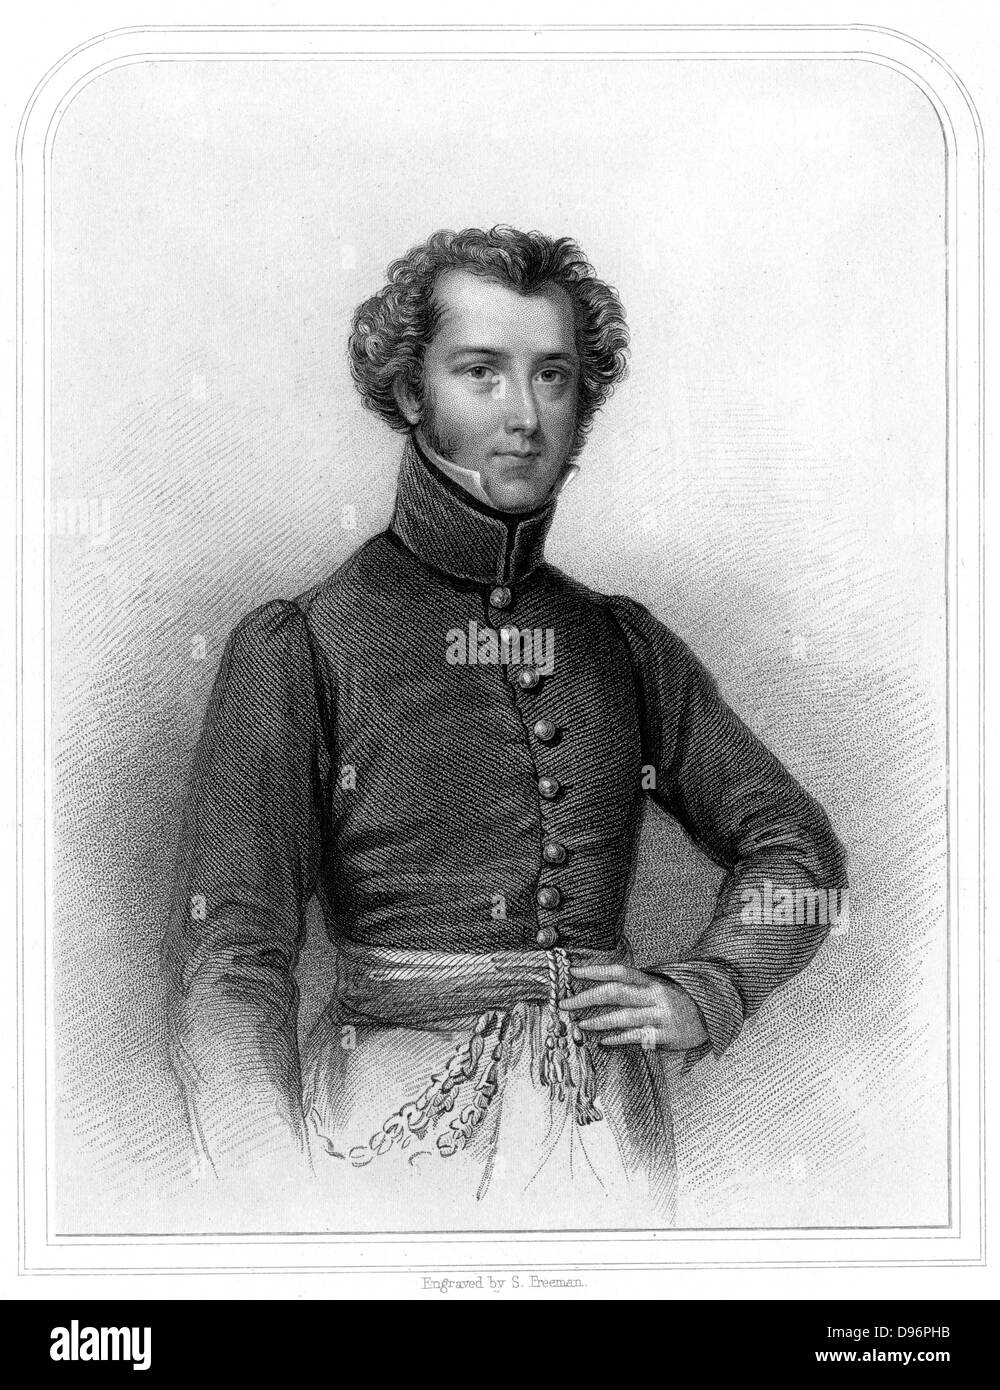 Alexander Gordon Laing (1793-1826), Scottish explorer of Western Africa.  He was the first European known to have reached the ancient city of Tombouctou (Timbuctoo) in August 1826 but was murdered there a month later. From 'A Biographical Dictionary of Eminent Scotsmen' by Thomas Thomson. (London, 1870). Engraving. Stock Photo